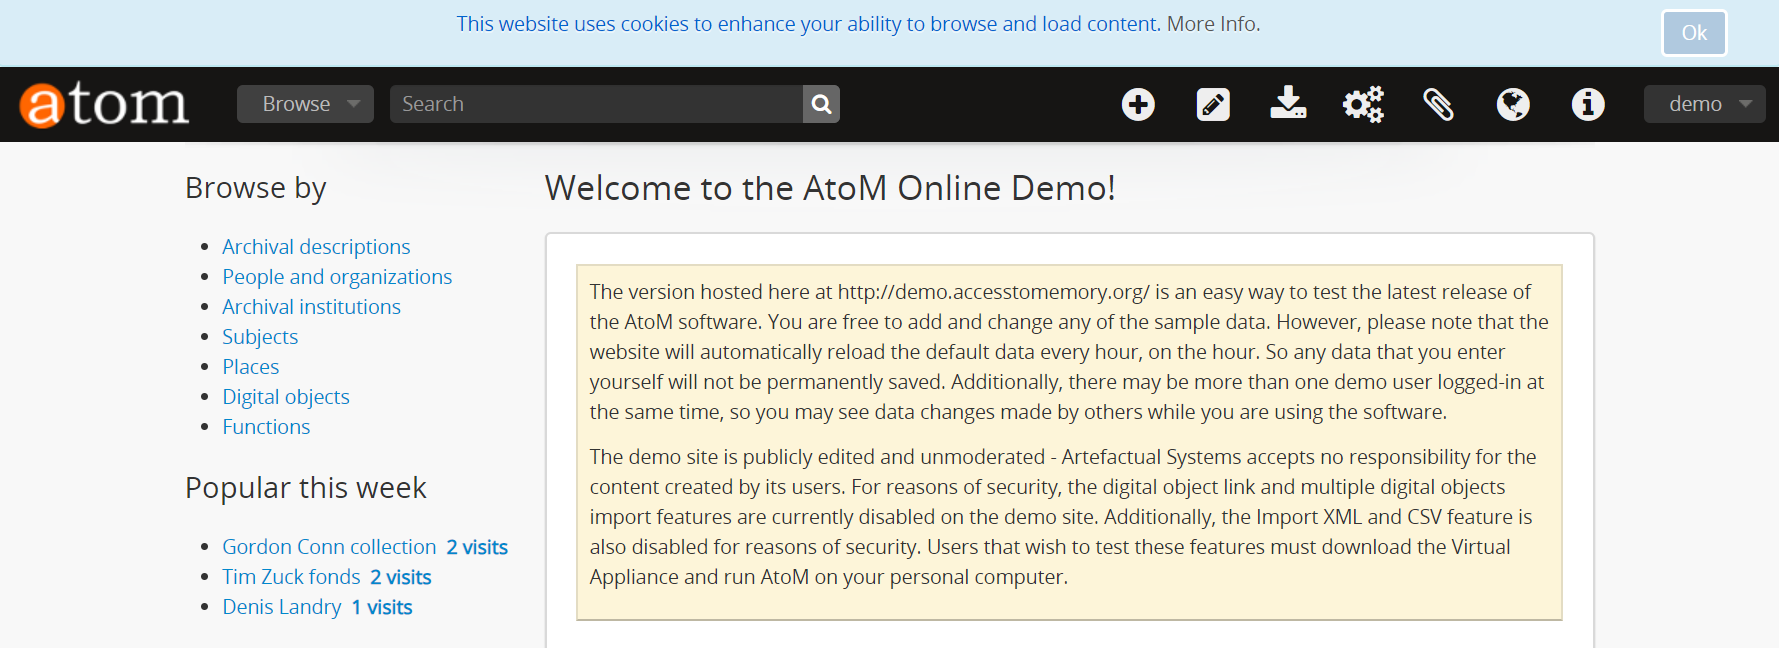 An image of the privacy notification banner shown above an AtoM homepage